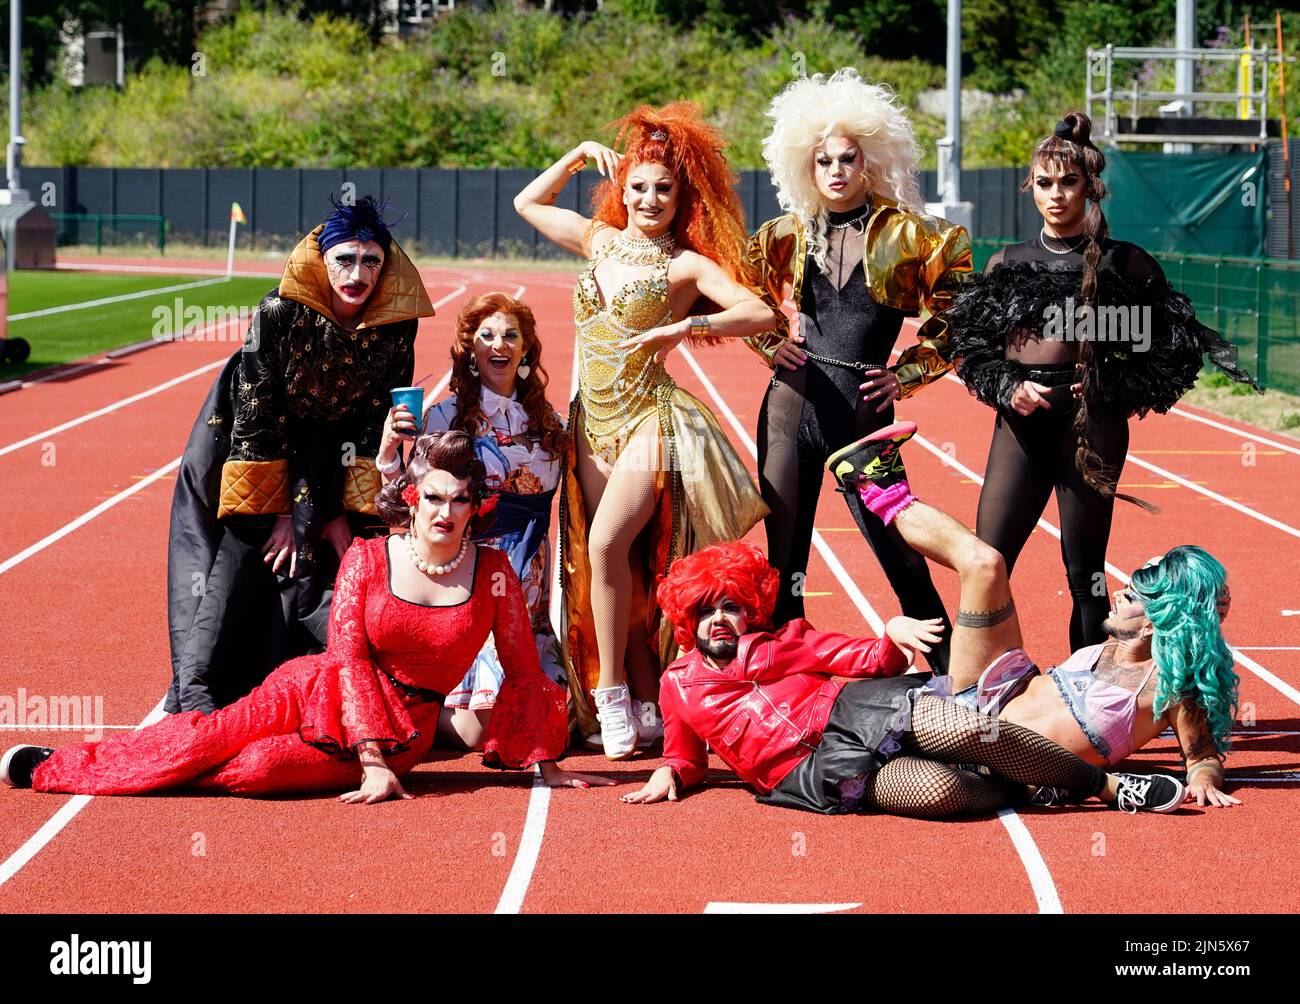 Edinburgh, Scotland, UK. 9th August 2022.  Drag queens from several shows performing as part of the Edinburgh Fringe 2022 Toake part in a Drag Race on the running track at the redeveloped Meadowbank stadium in Edinburgh today. From left; Seayonce, Kate Butch, Dixie Longate, Belle Du Ball, Crudi Dench, Enter Serenity, Nastia, Captain Kidd.  Iain Masterton/Alamy Live News Stock Photo